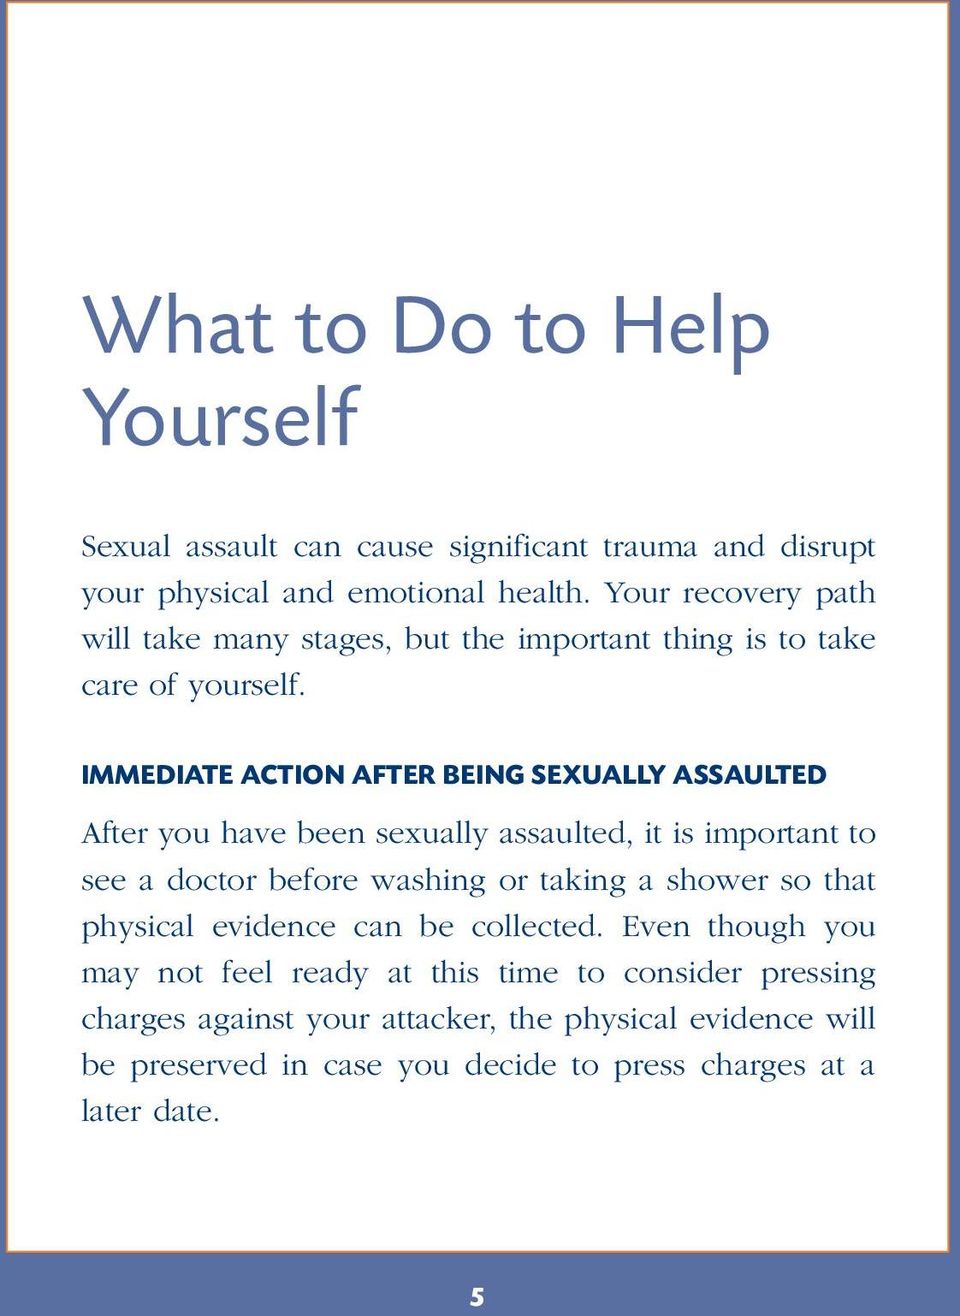 IMMEDIATE ACTION AFTER BEING SEXUALLY ASSAULTED After you have been sexually assaulted, it is important to see a doctor before washing or taking a